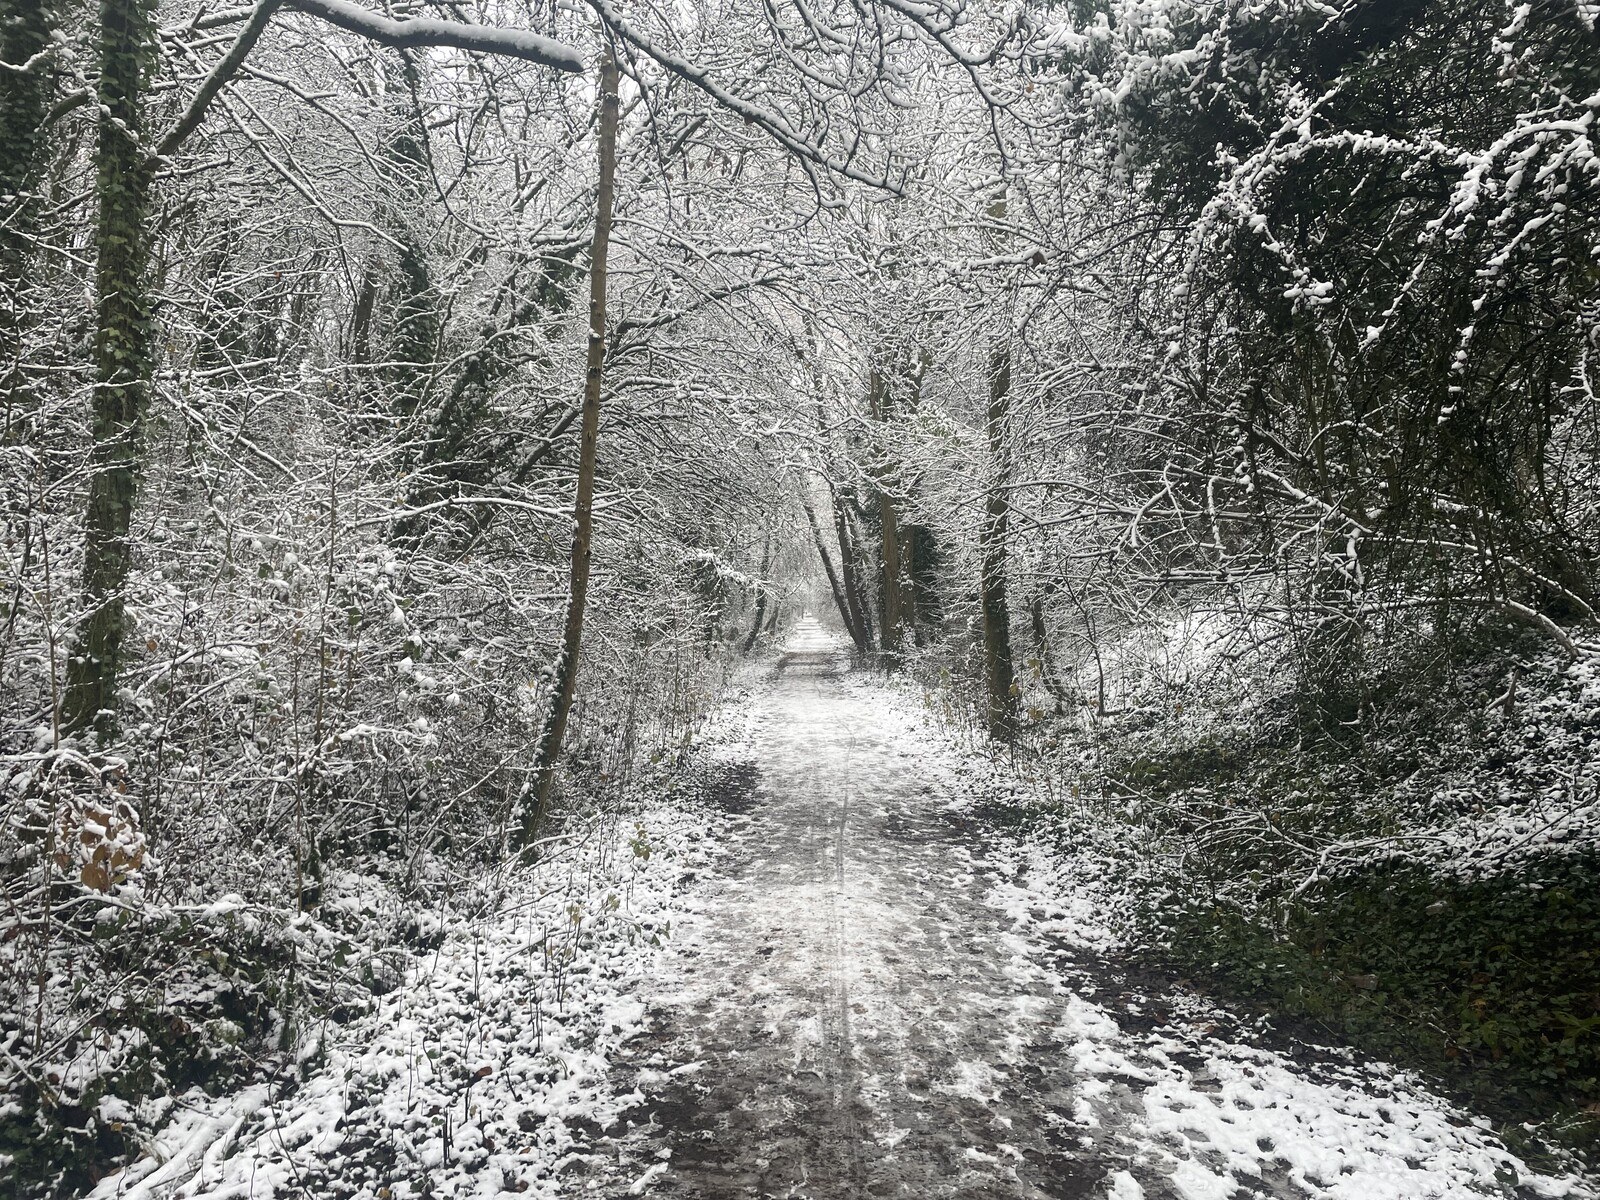 Looking down a stock-straight path with tall woods on either side